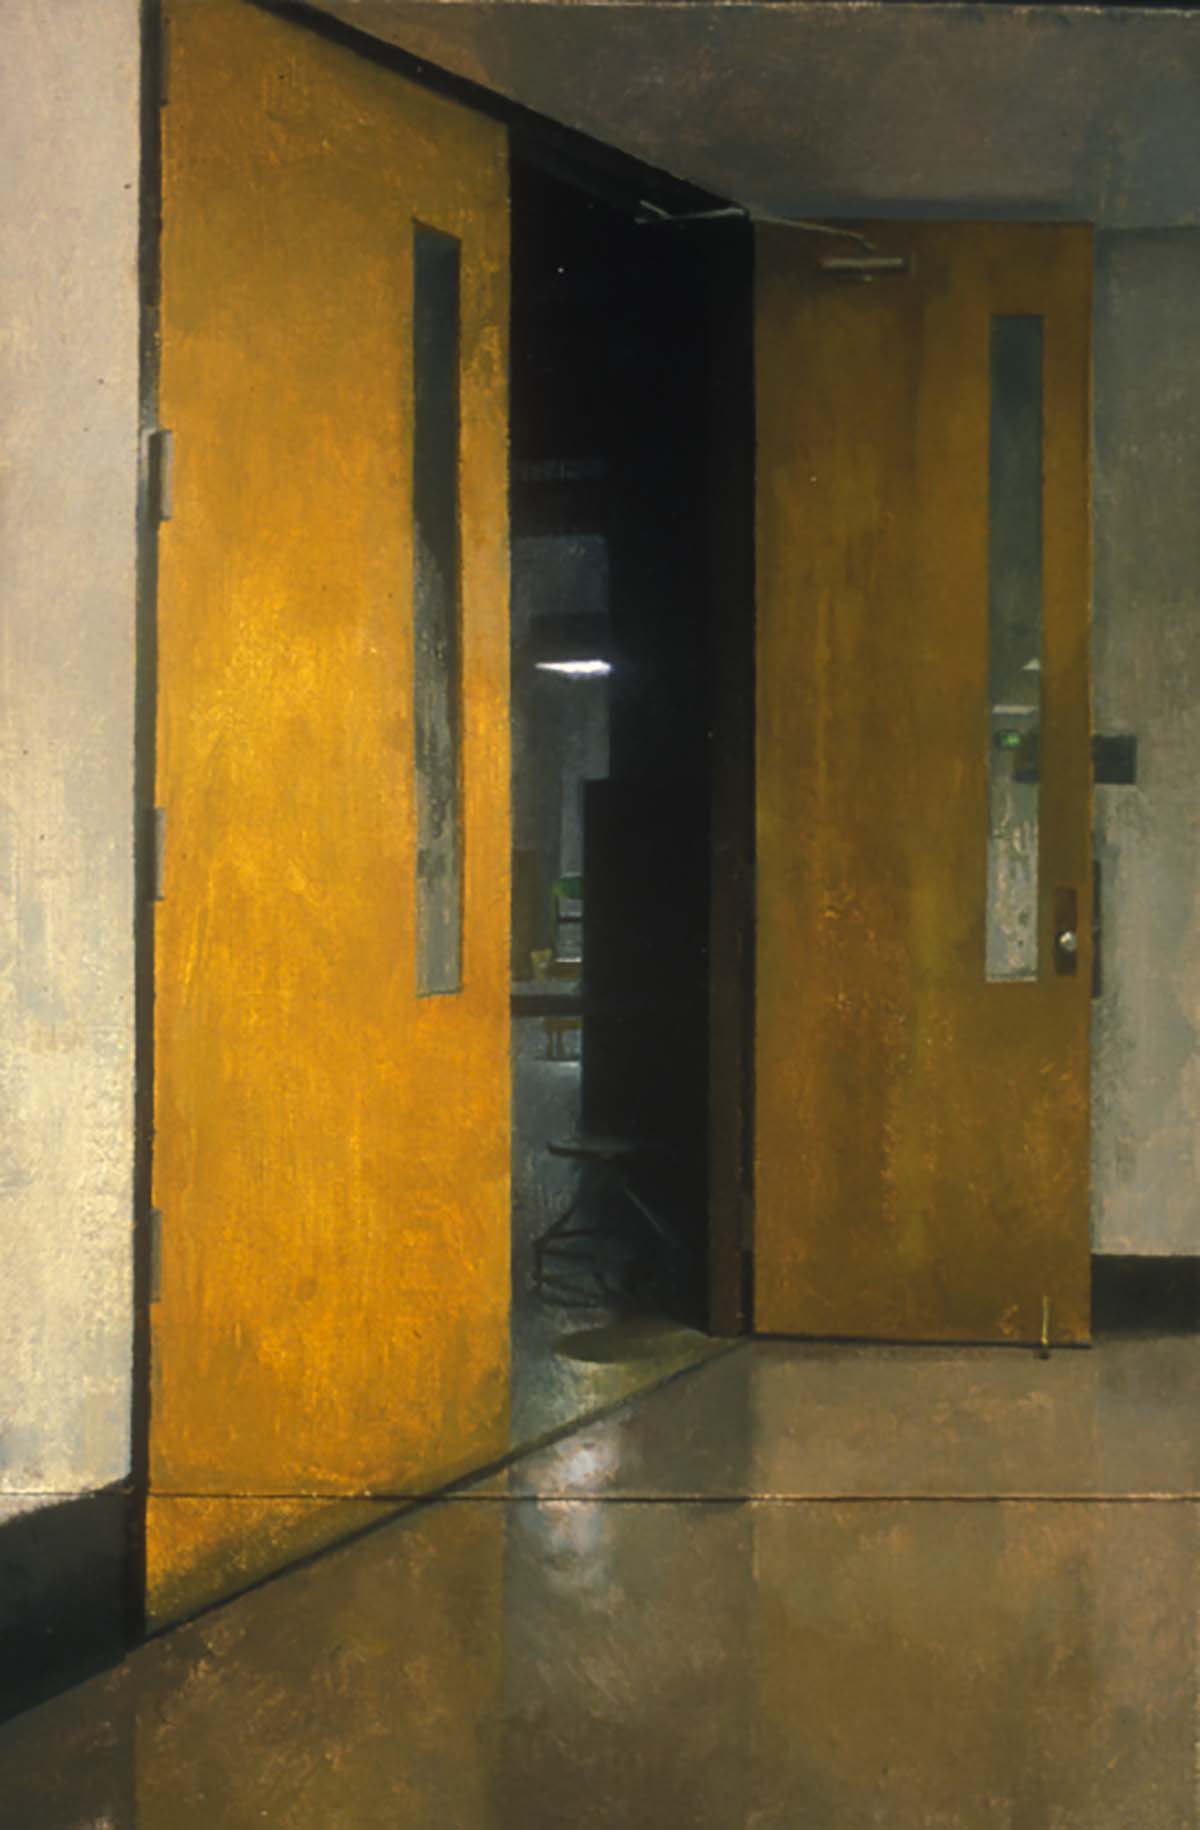 Under the Spotlight / oil on panel / 9 ¼" x 13 ¾" / 2002-03 / Private Collection